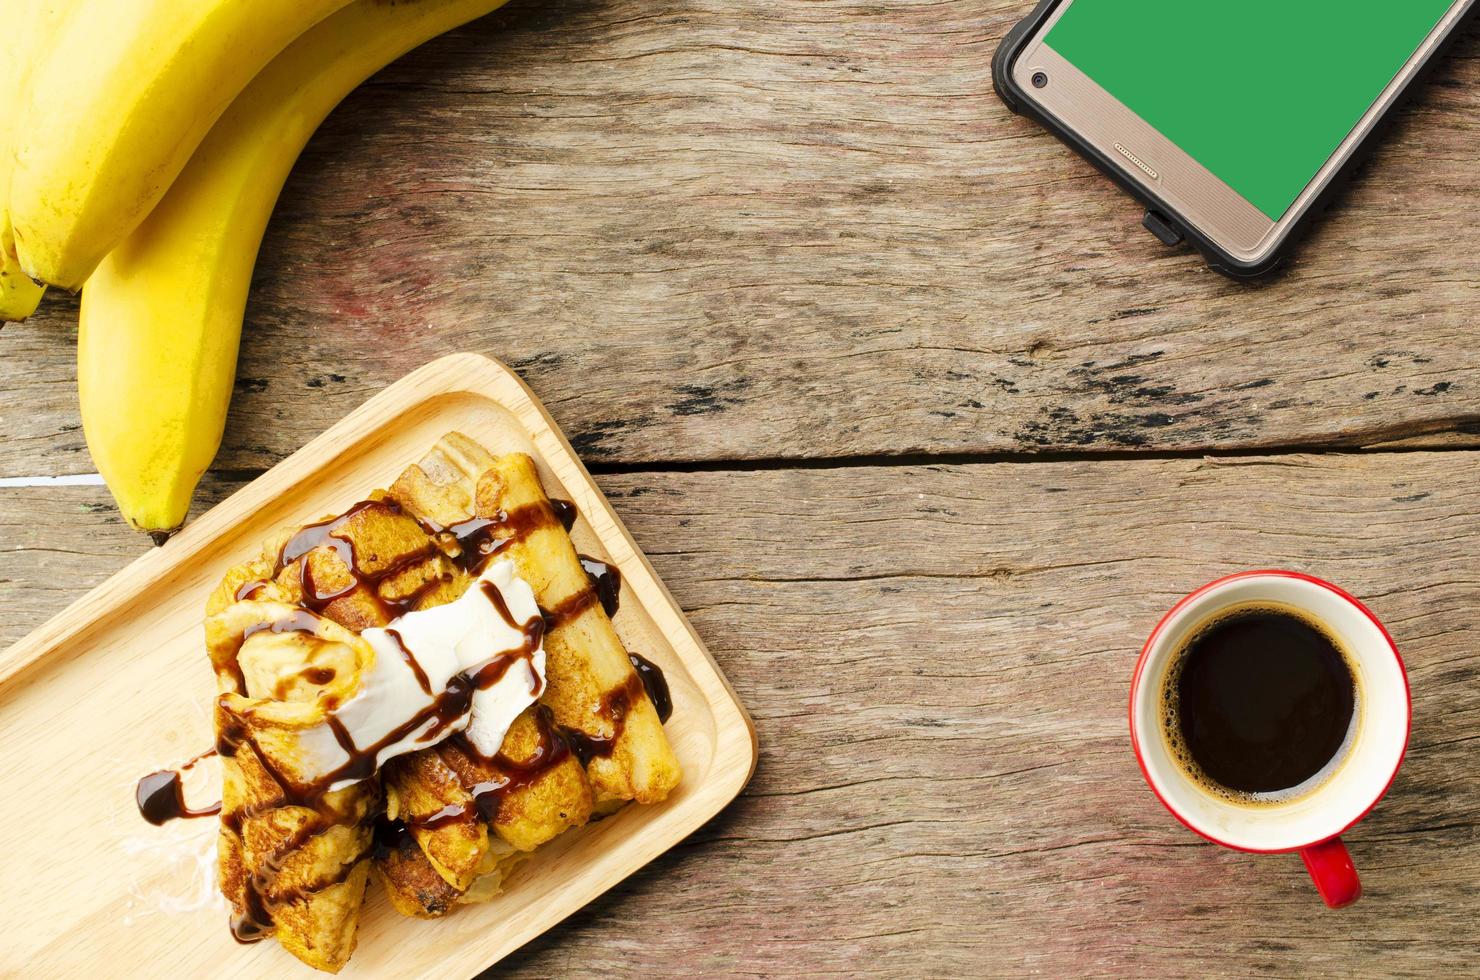 Banana french toast and Black coffee red cup and smartphone photo